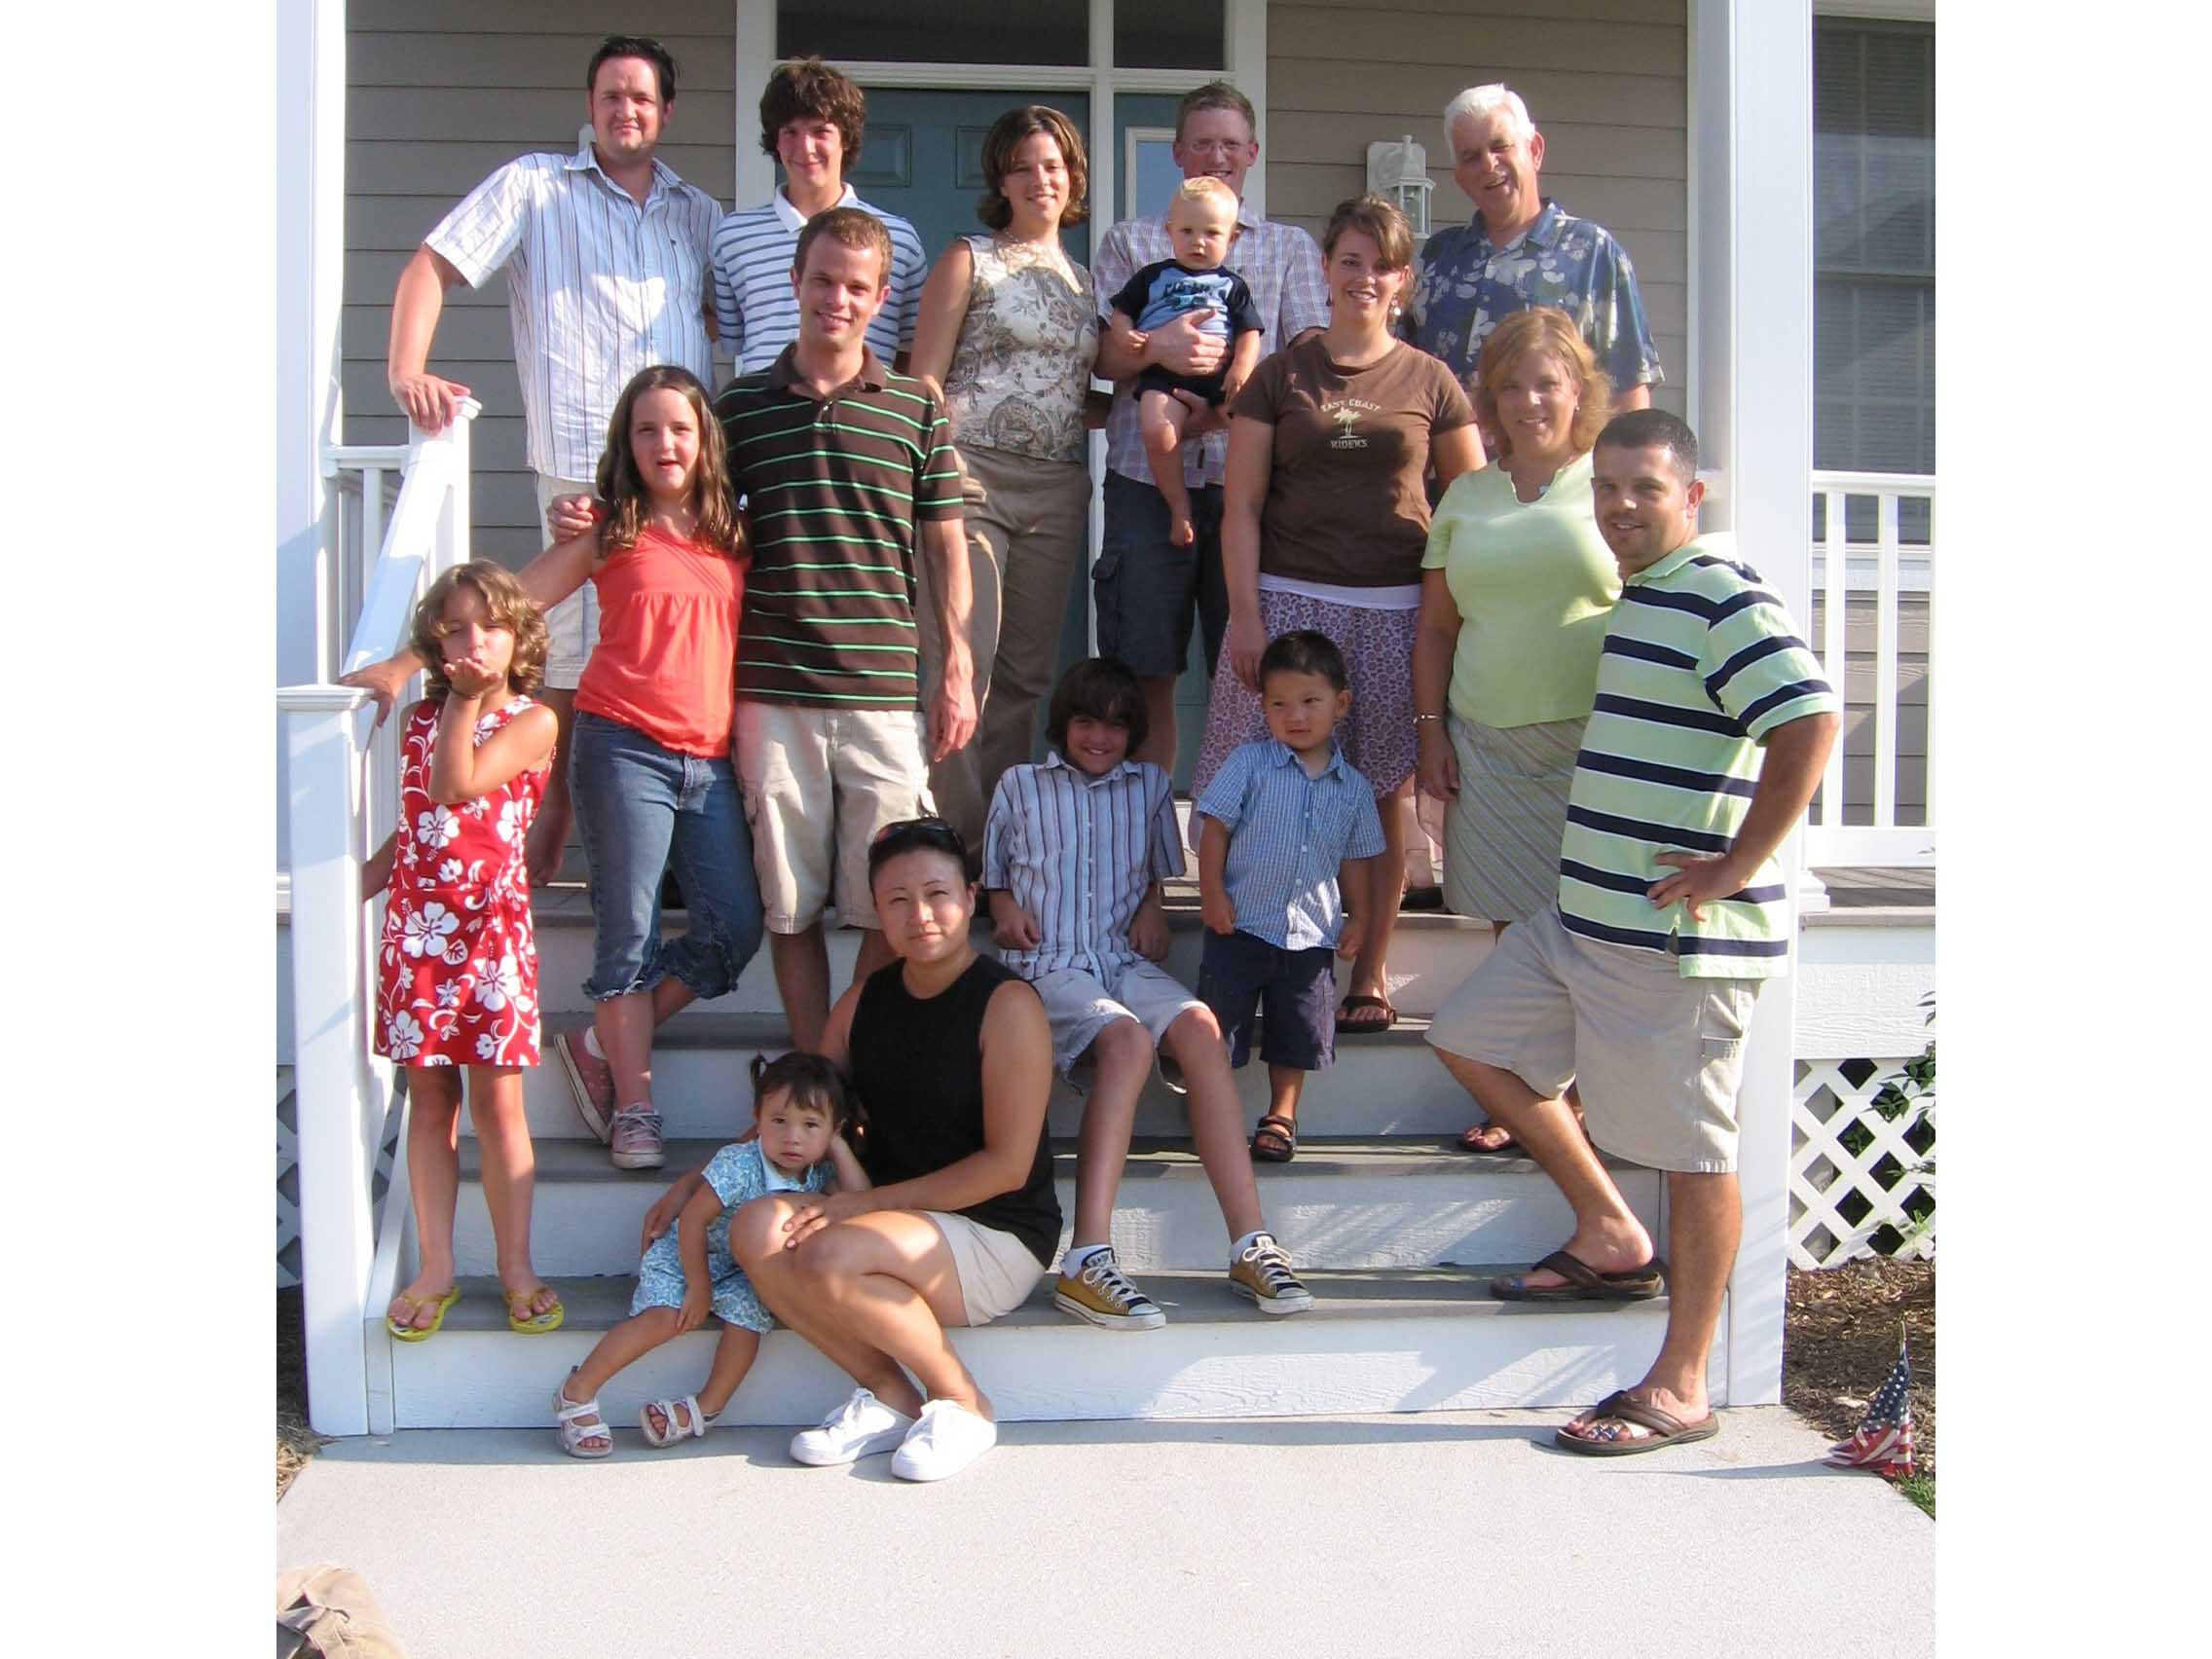 a picture of my family on vacation in 2005